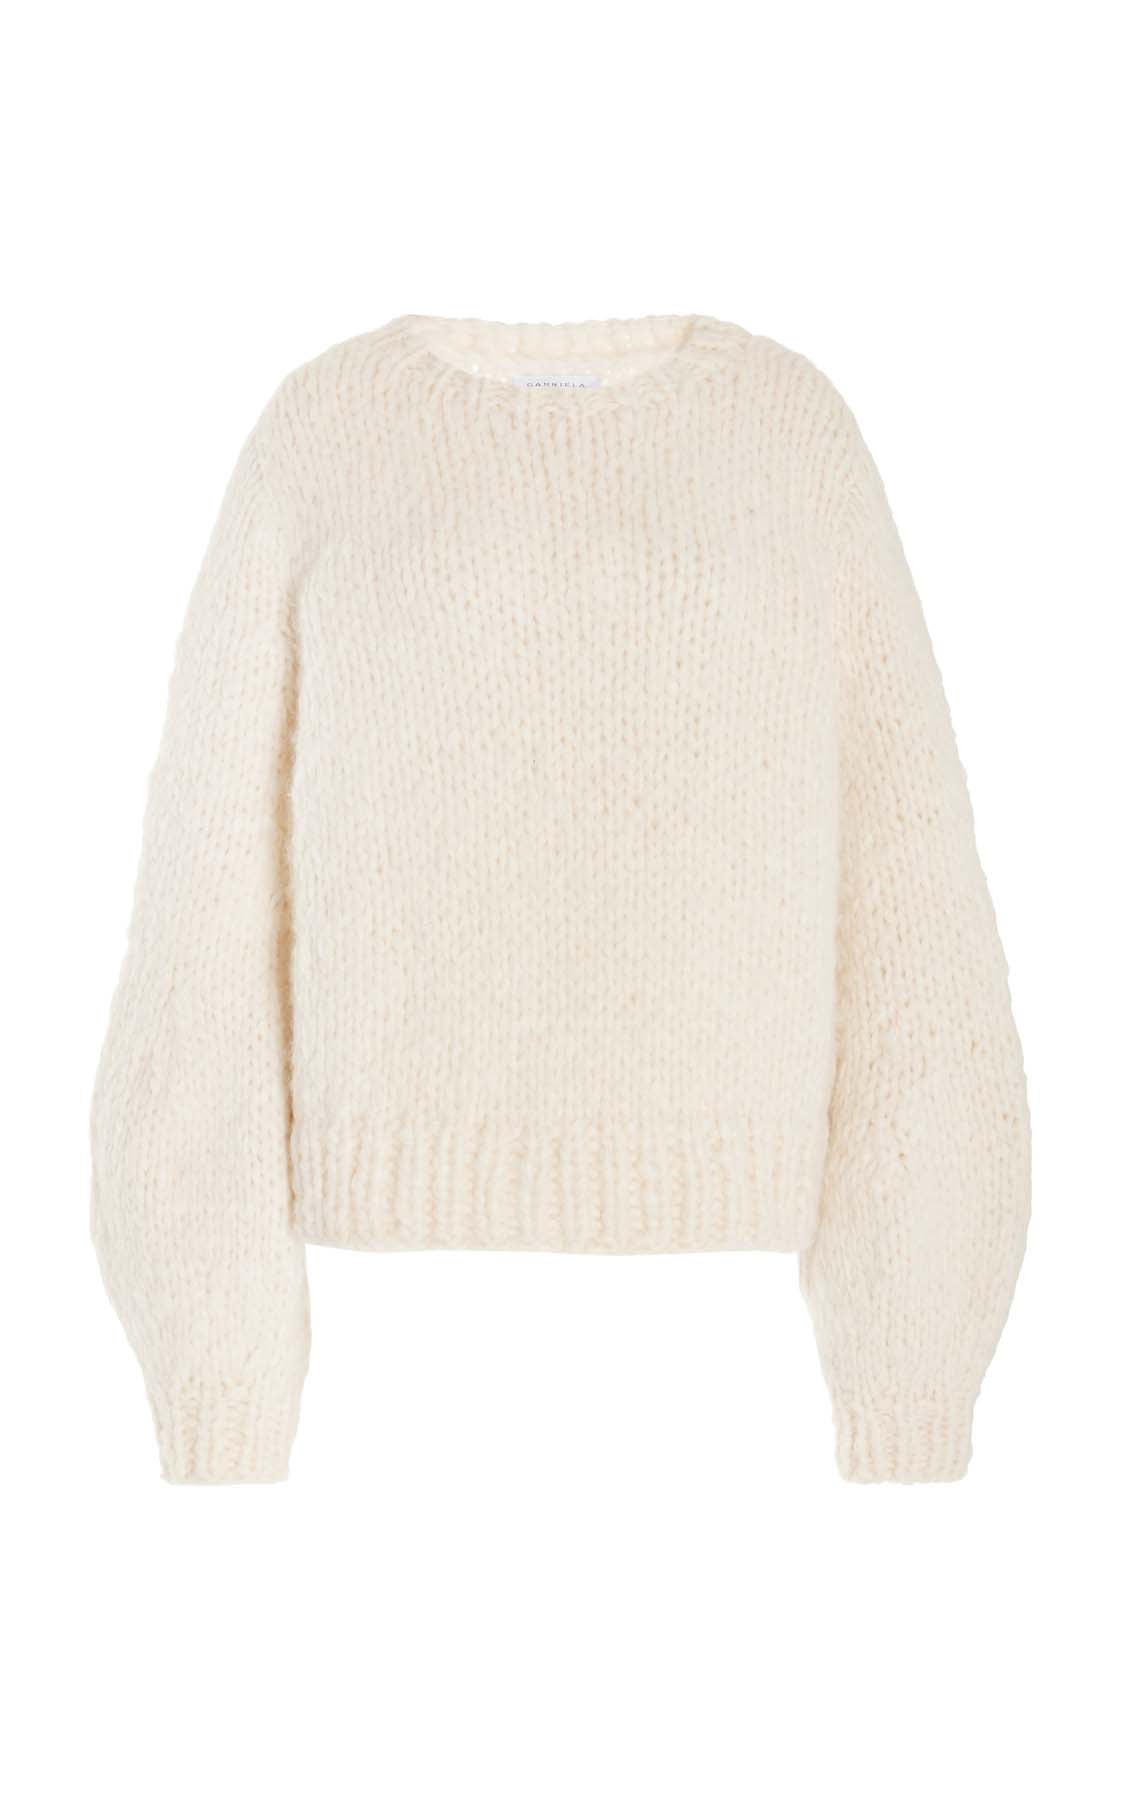 Clarissa Knit Sweater in Ivory Welfat Cashmere